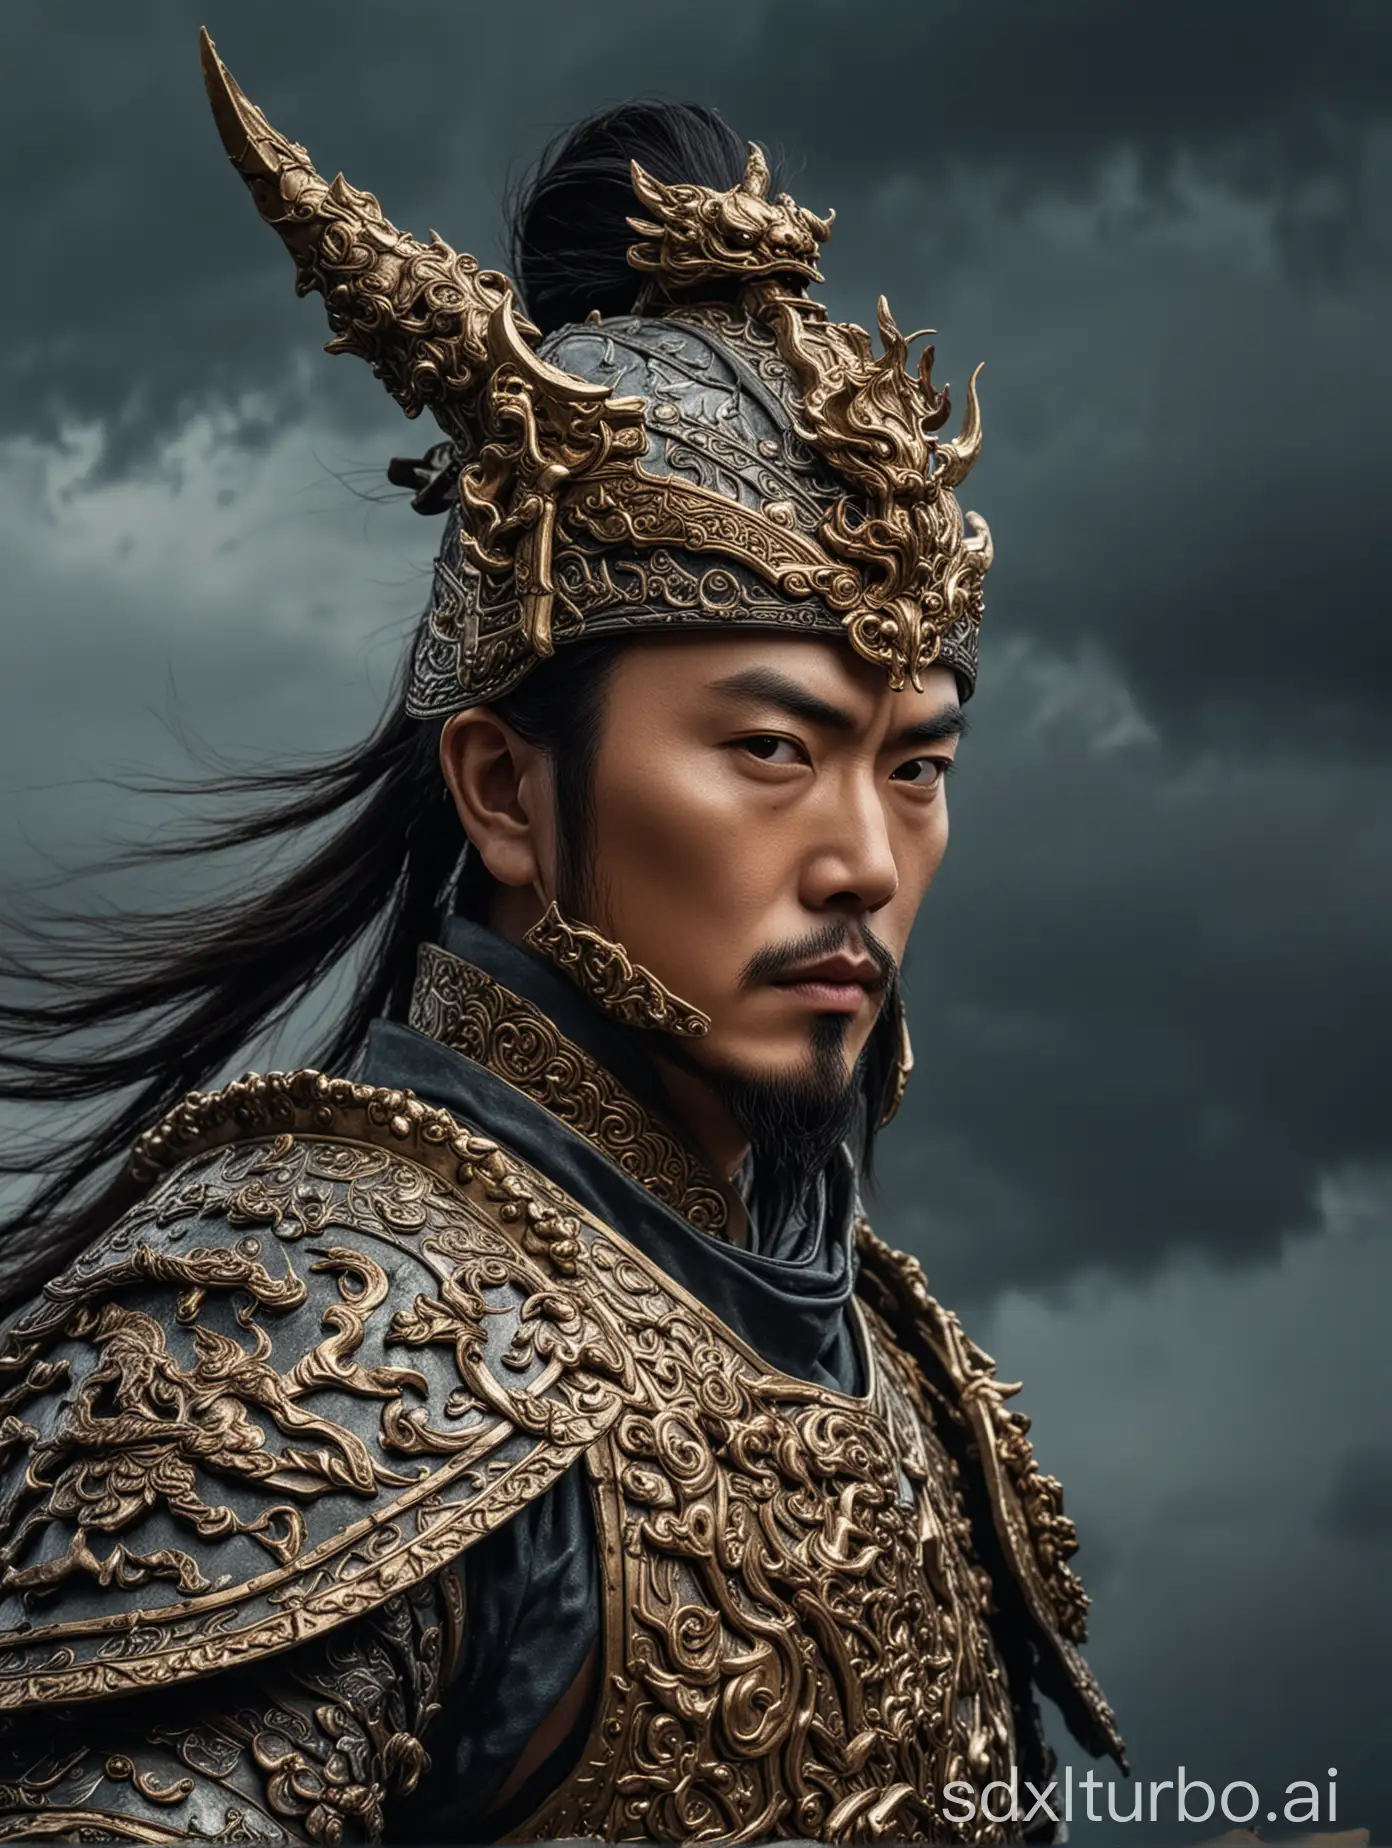 A fierce close-up portrait of Lu Bu in ornate armor, his halberd held vertically, with a dramatic stormy sky background